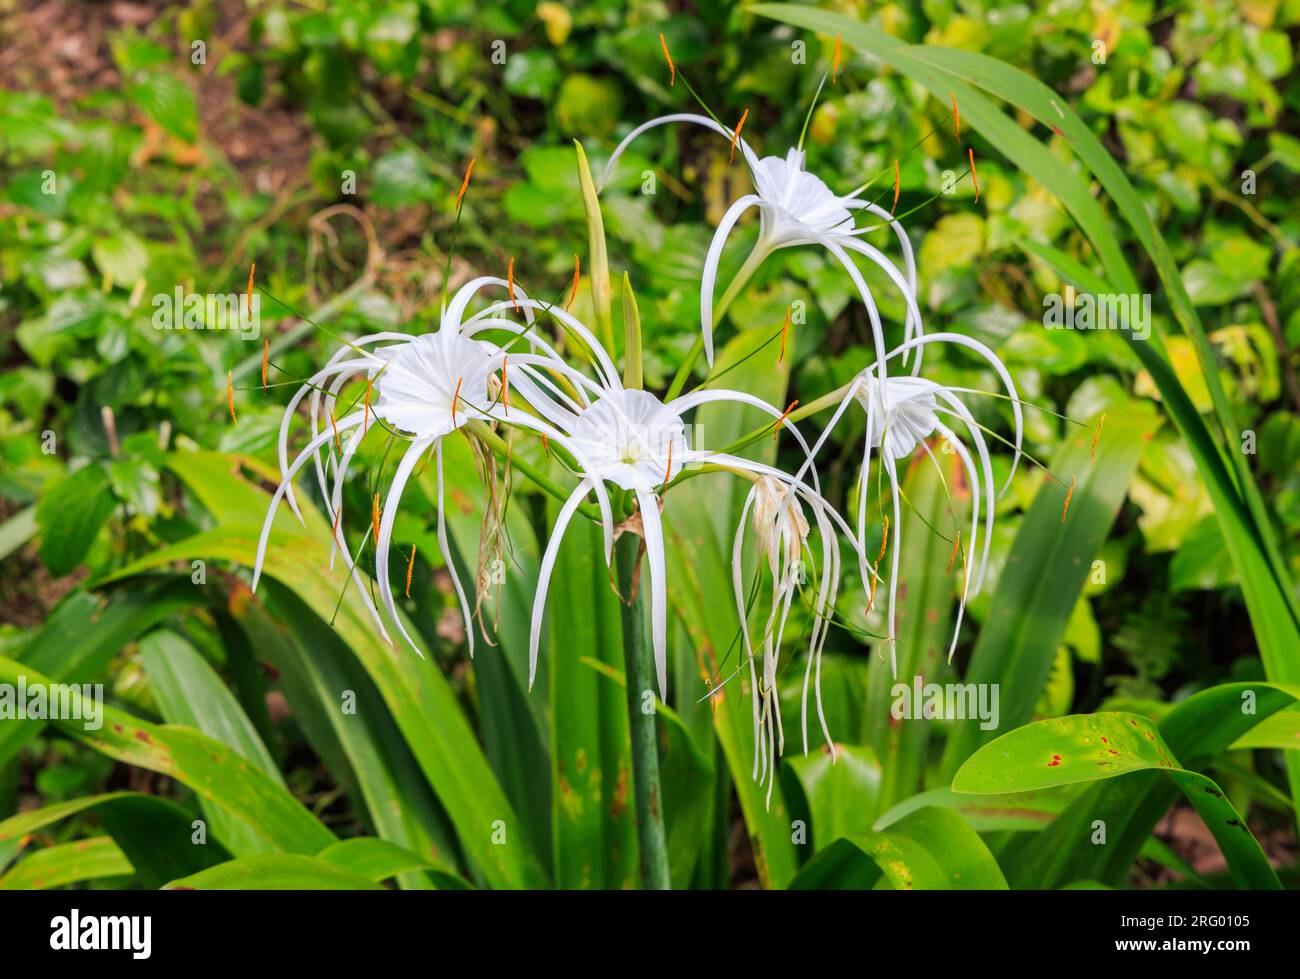 White Hymenocallis flowers in Ann Siang Hill Park, Singapore Stock Photo